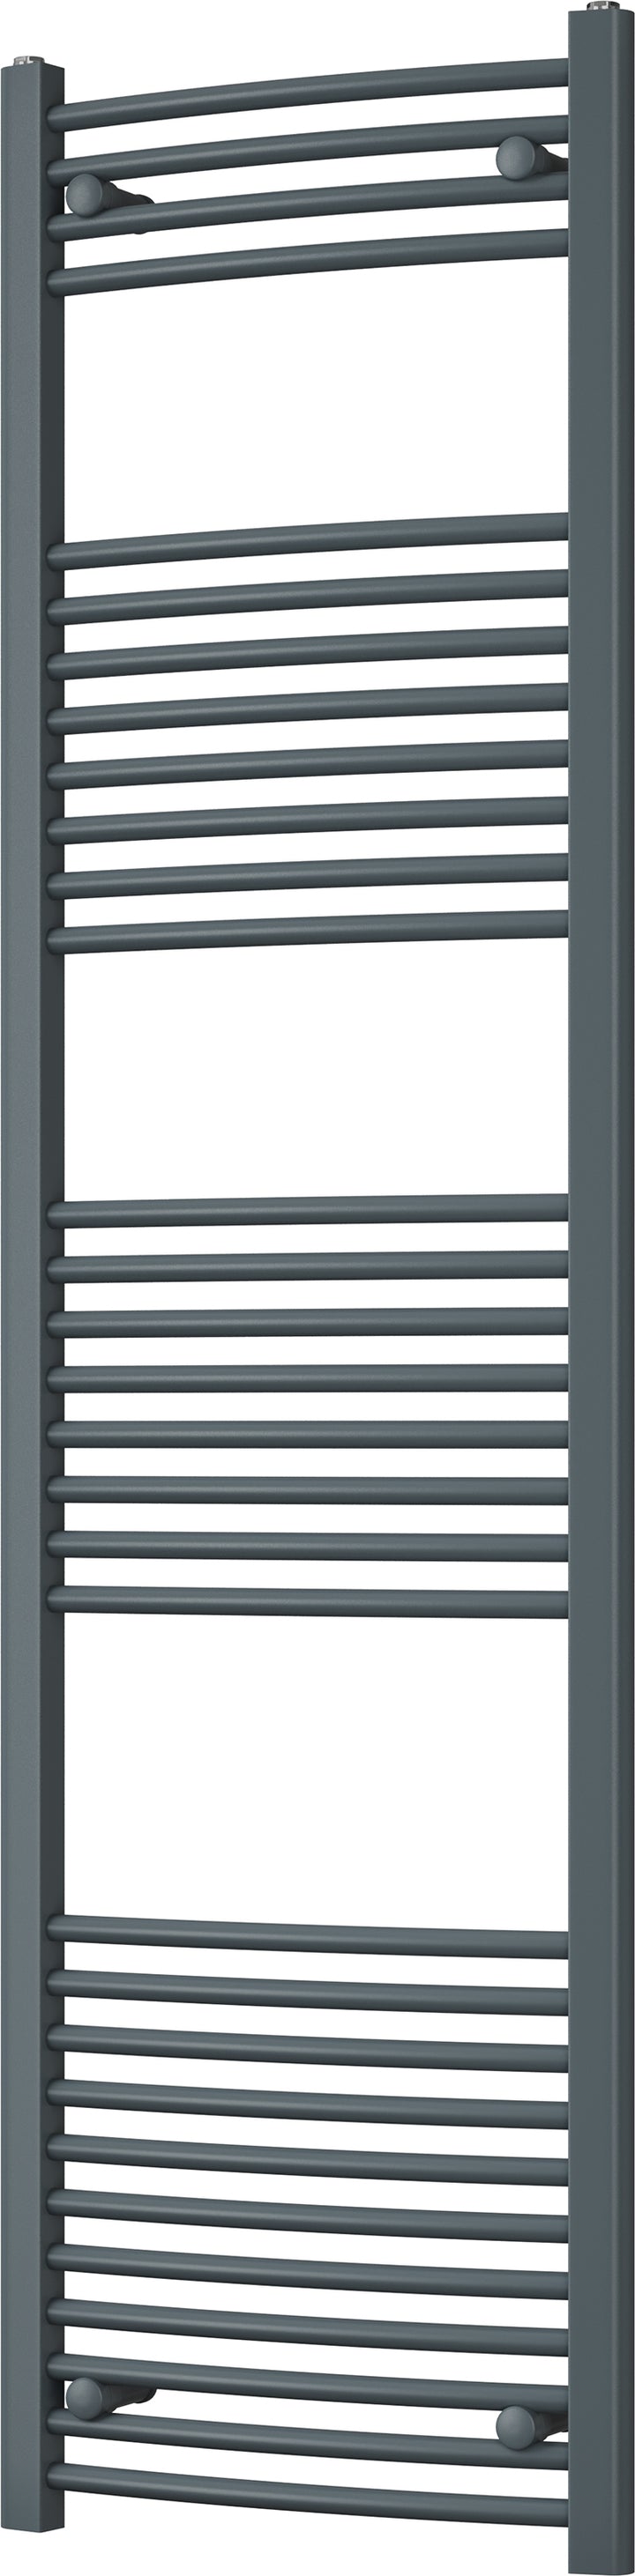 Zennor - Anthracite Heated Towel Rail - H1800mm x W500mm - Curved